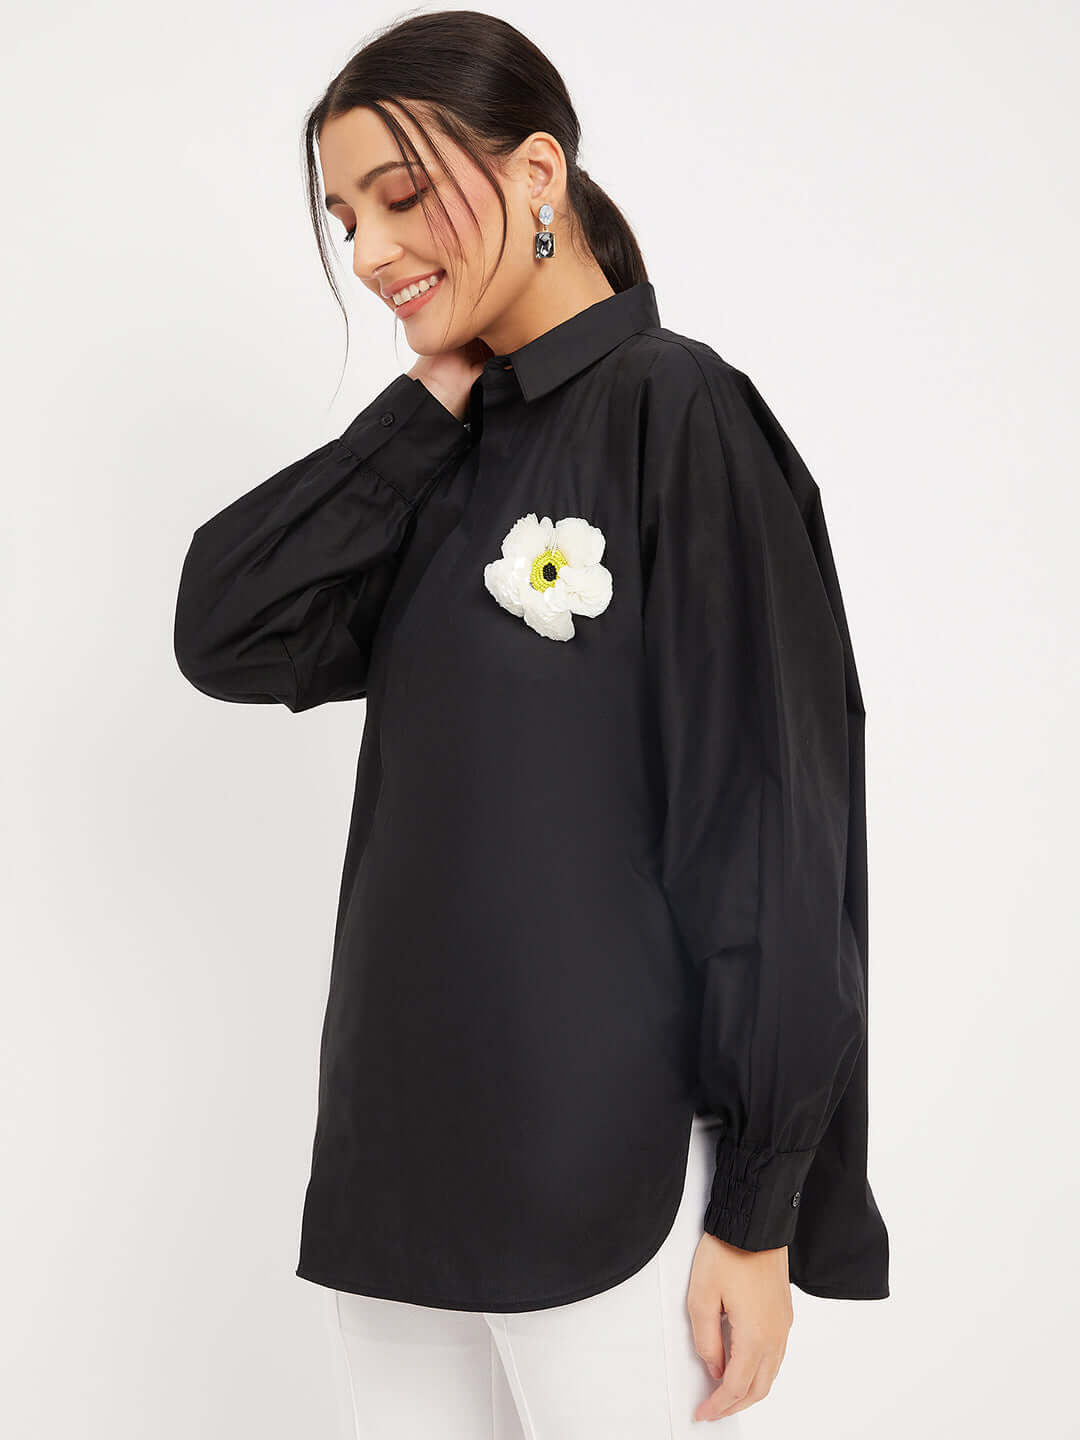 Cotton Solid Black Embroidery Shirt